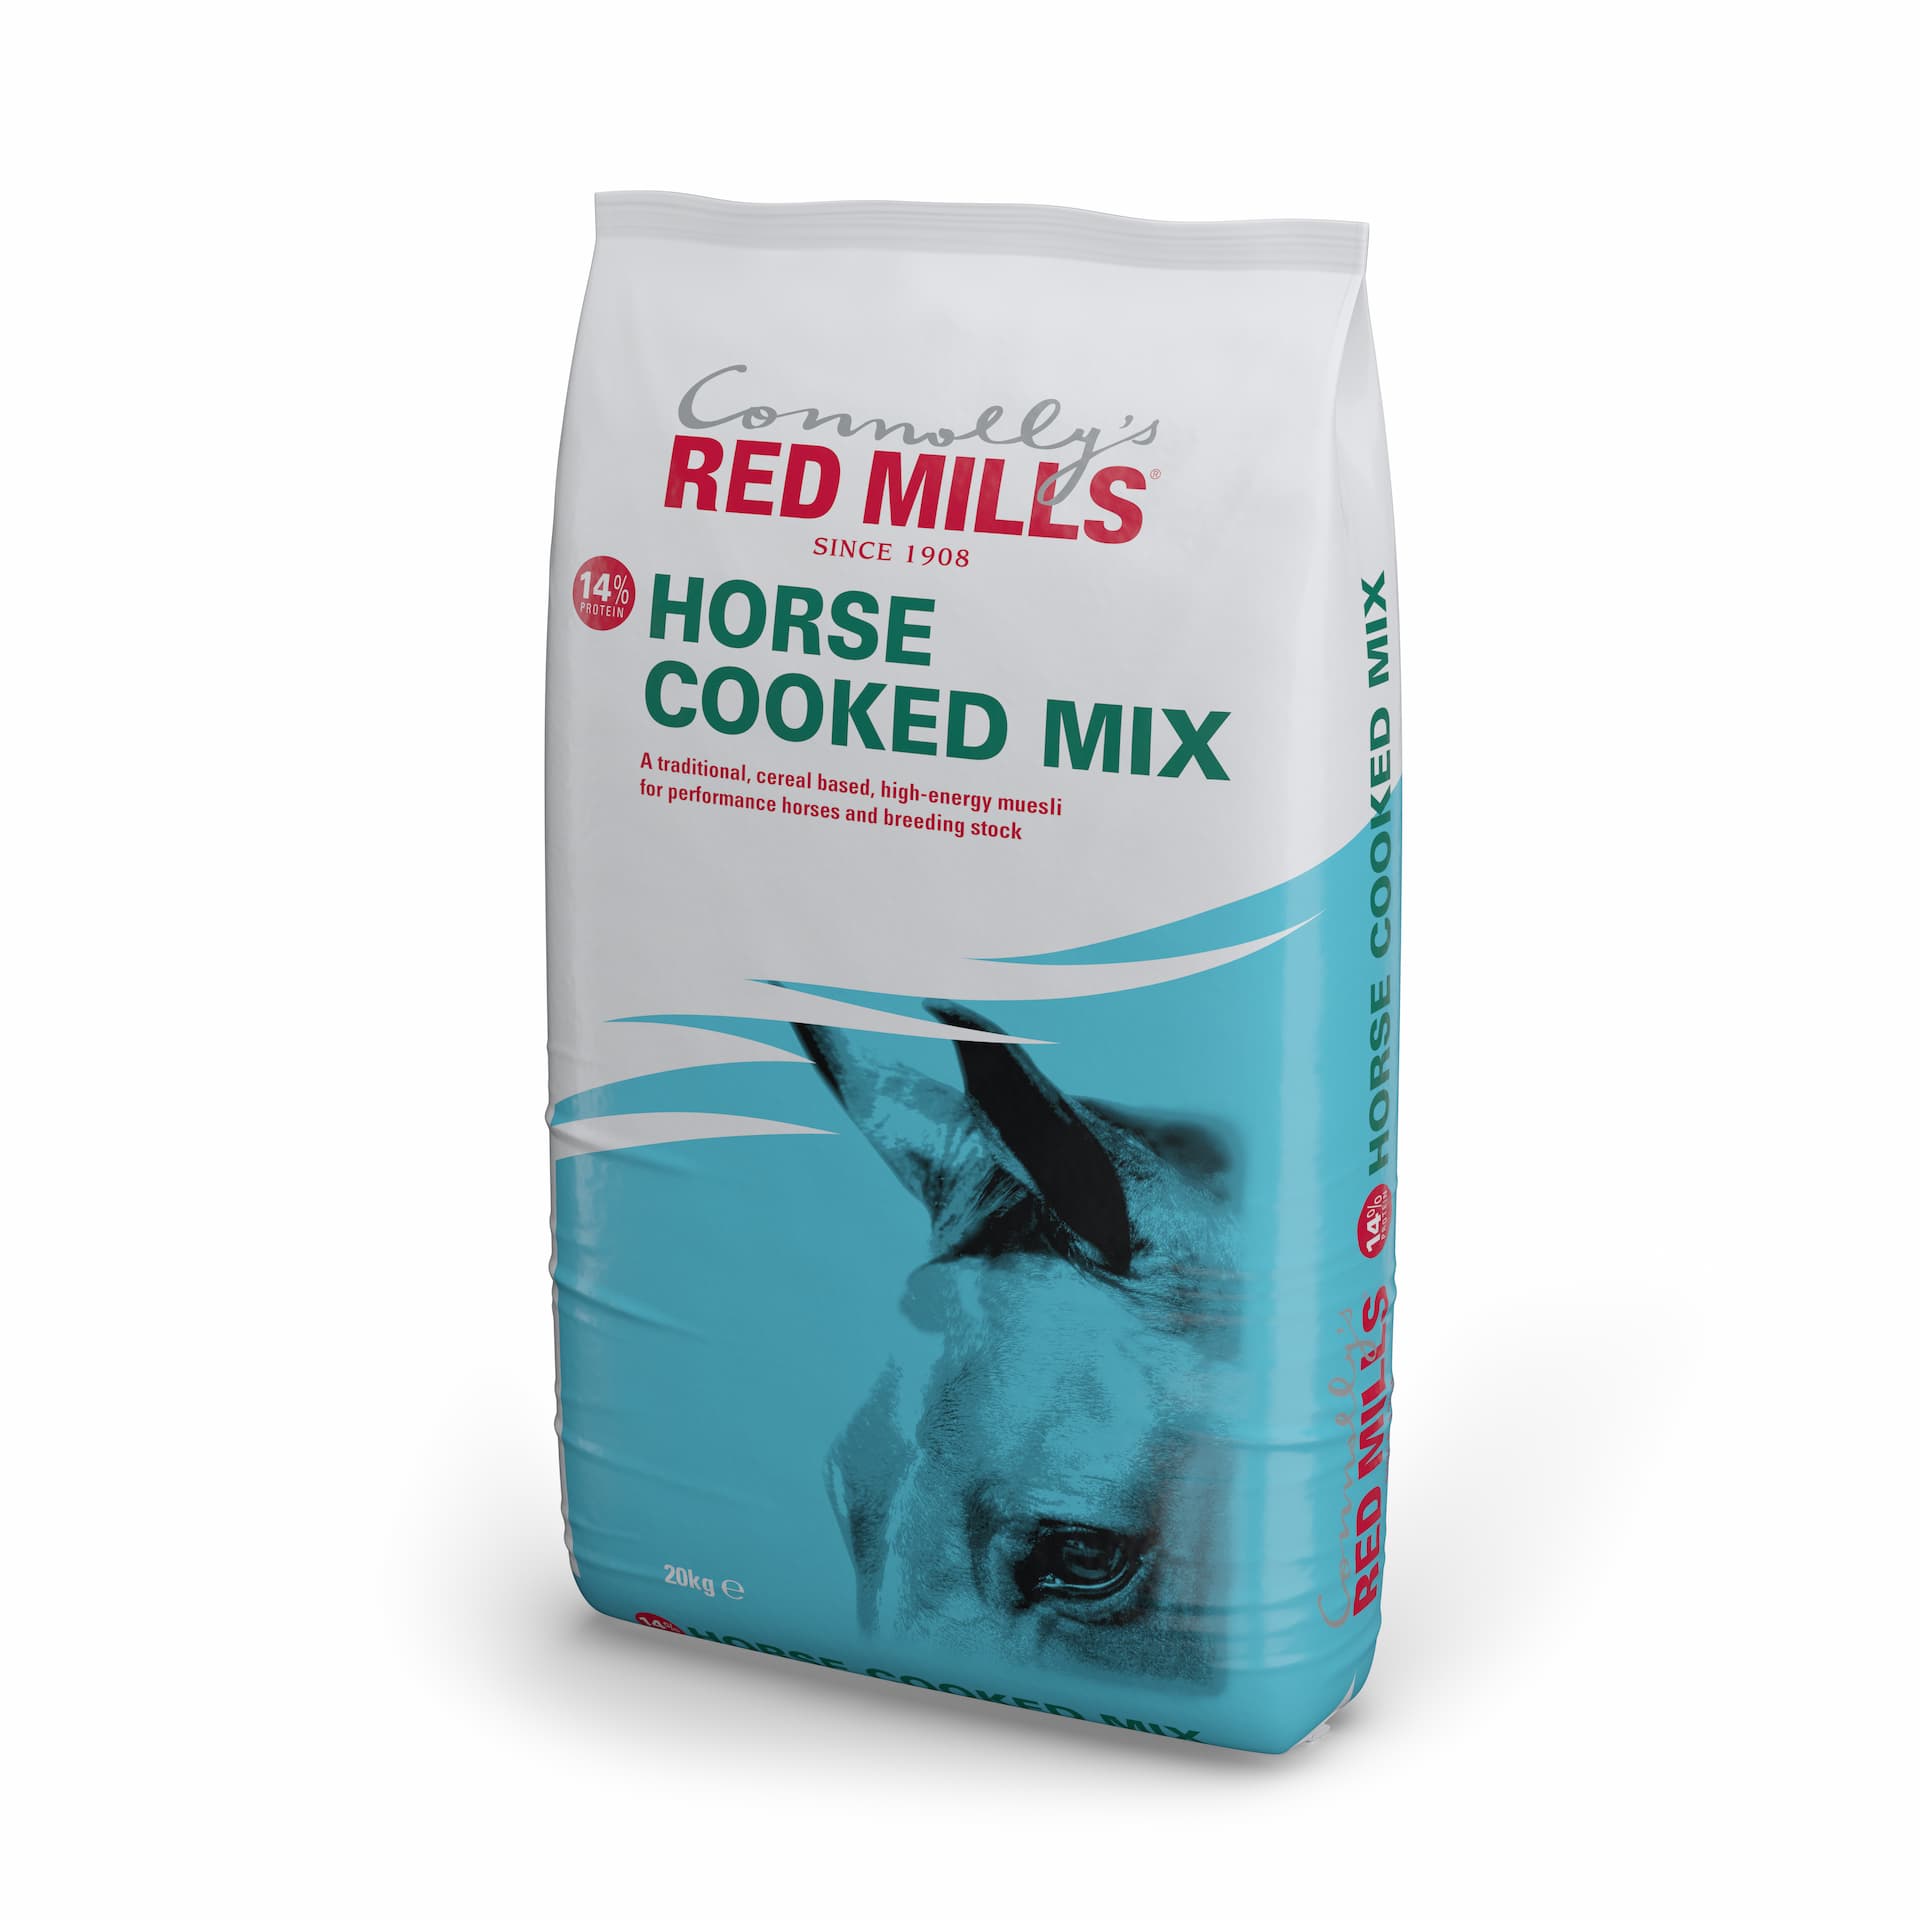 14% Horse Cooked Mix